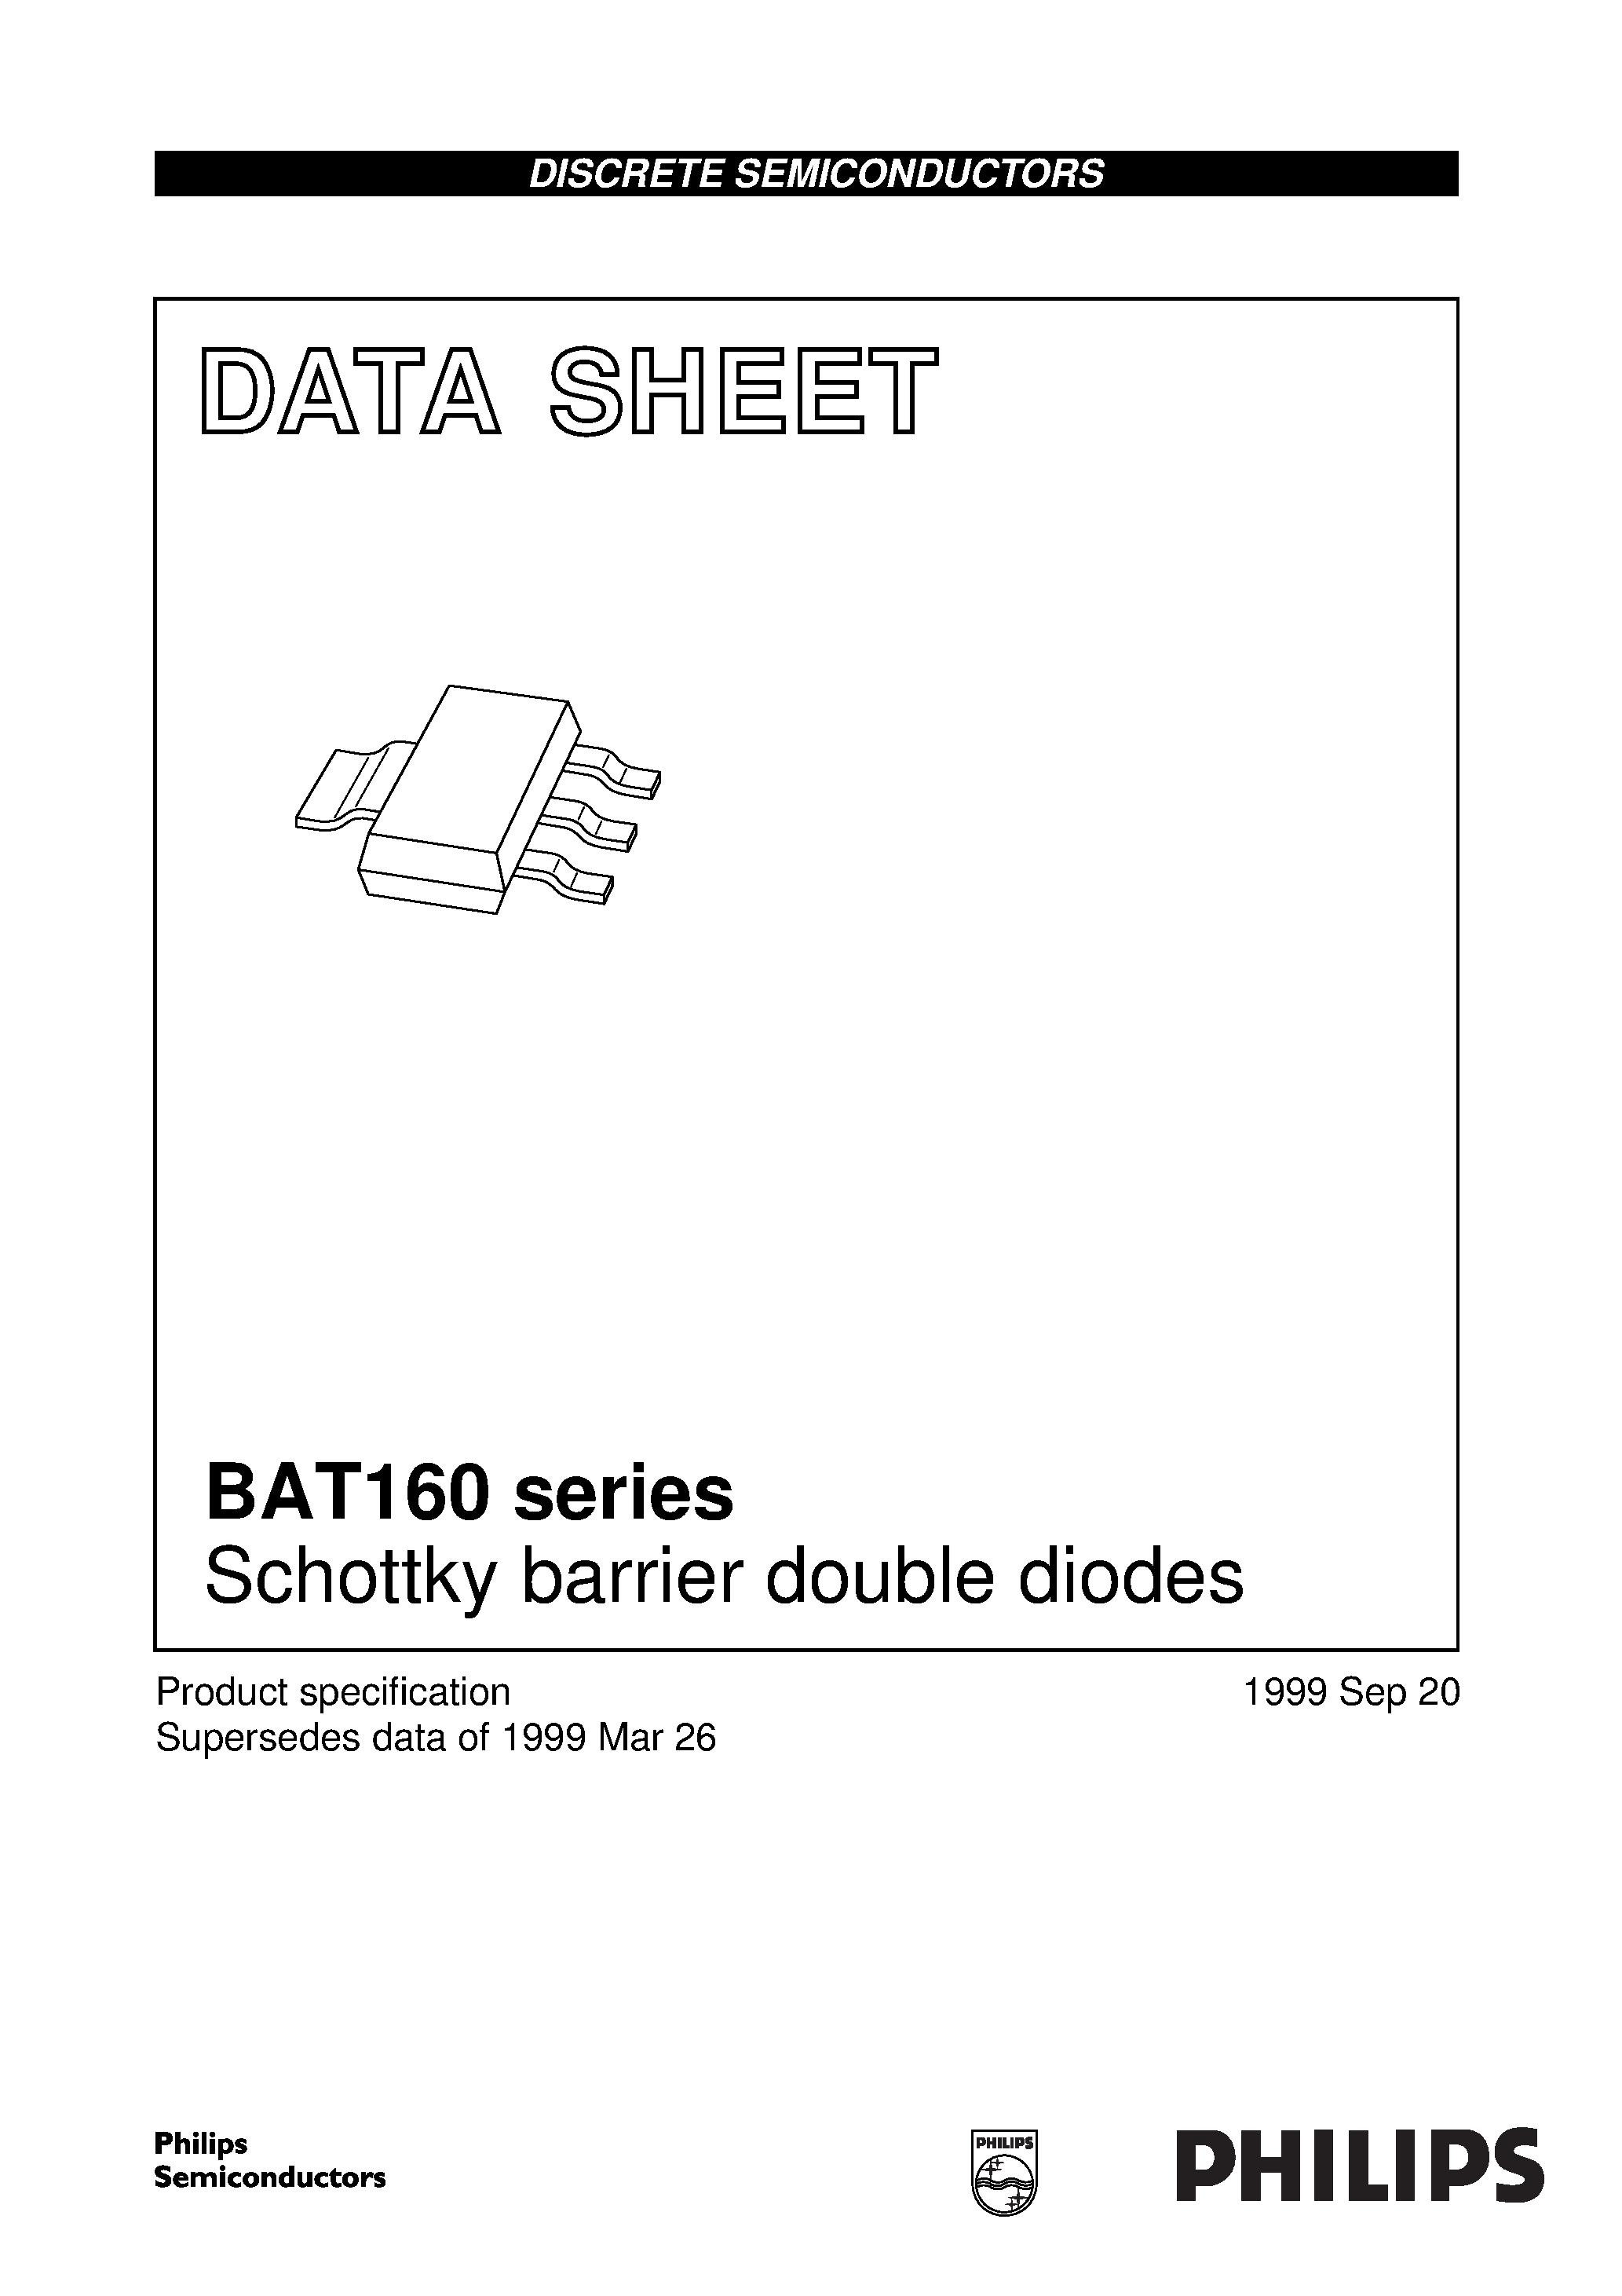 Datasheet BAT160A - Schottky barrier double diodes page 1